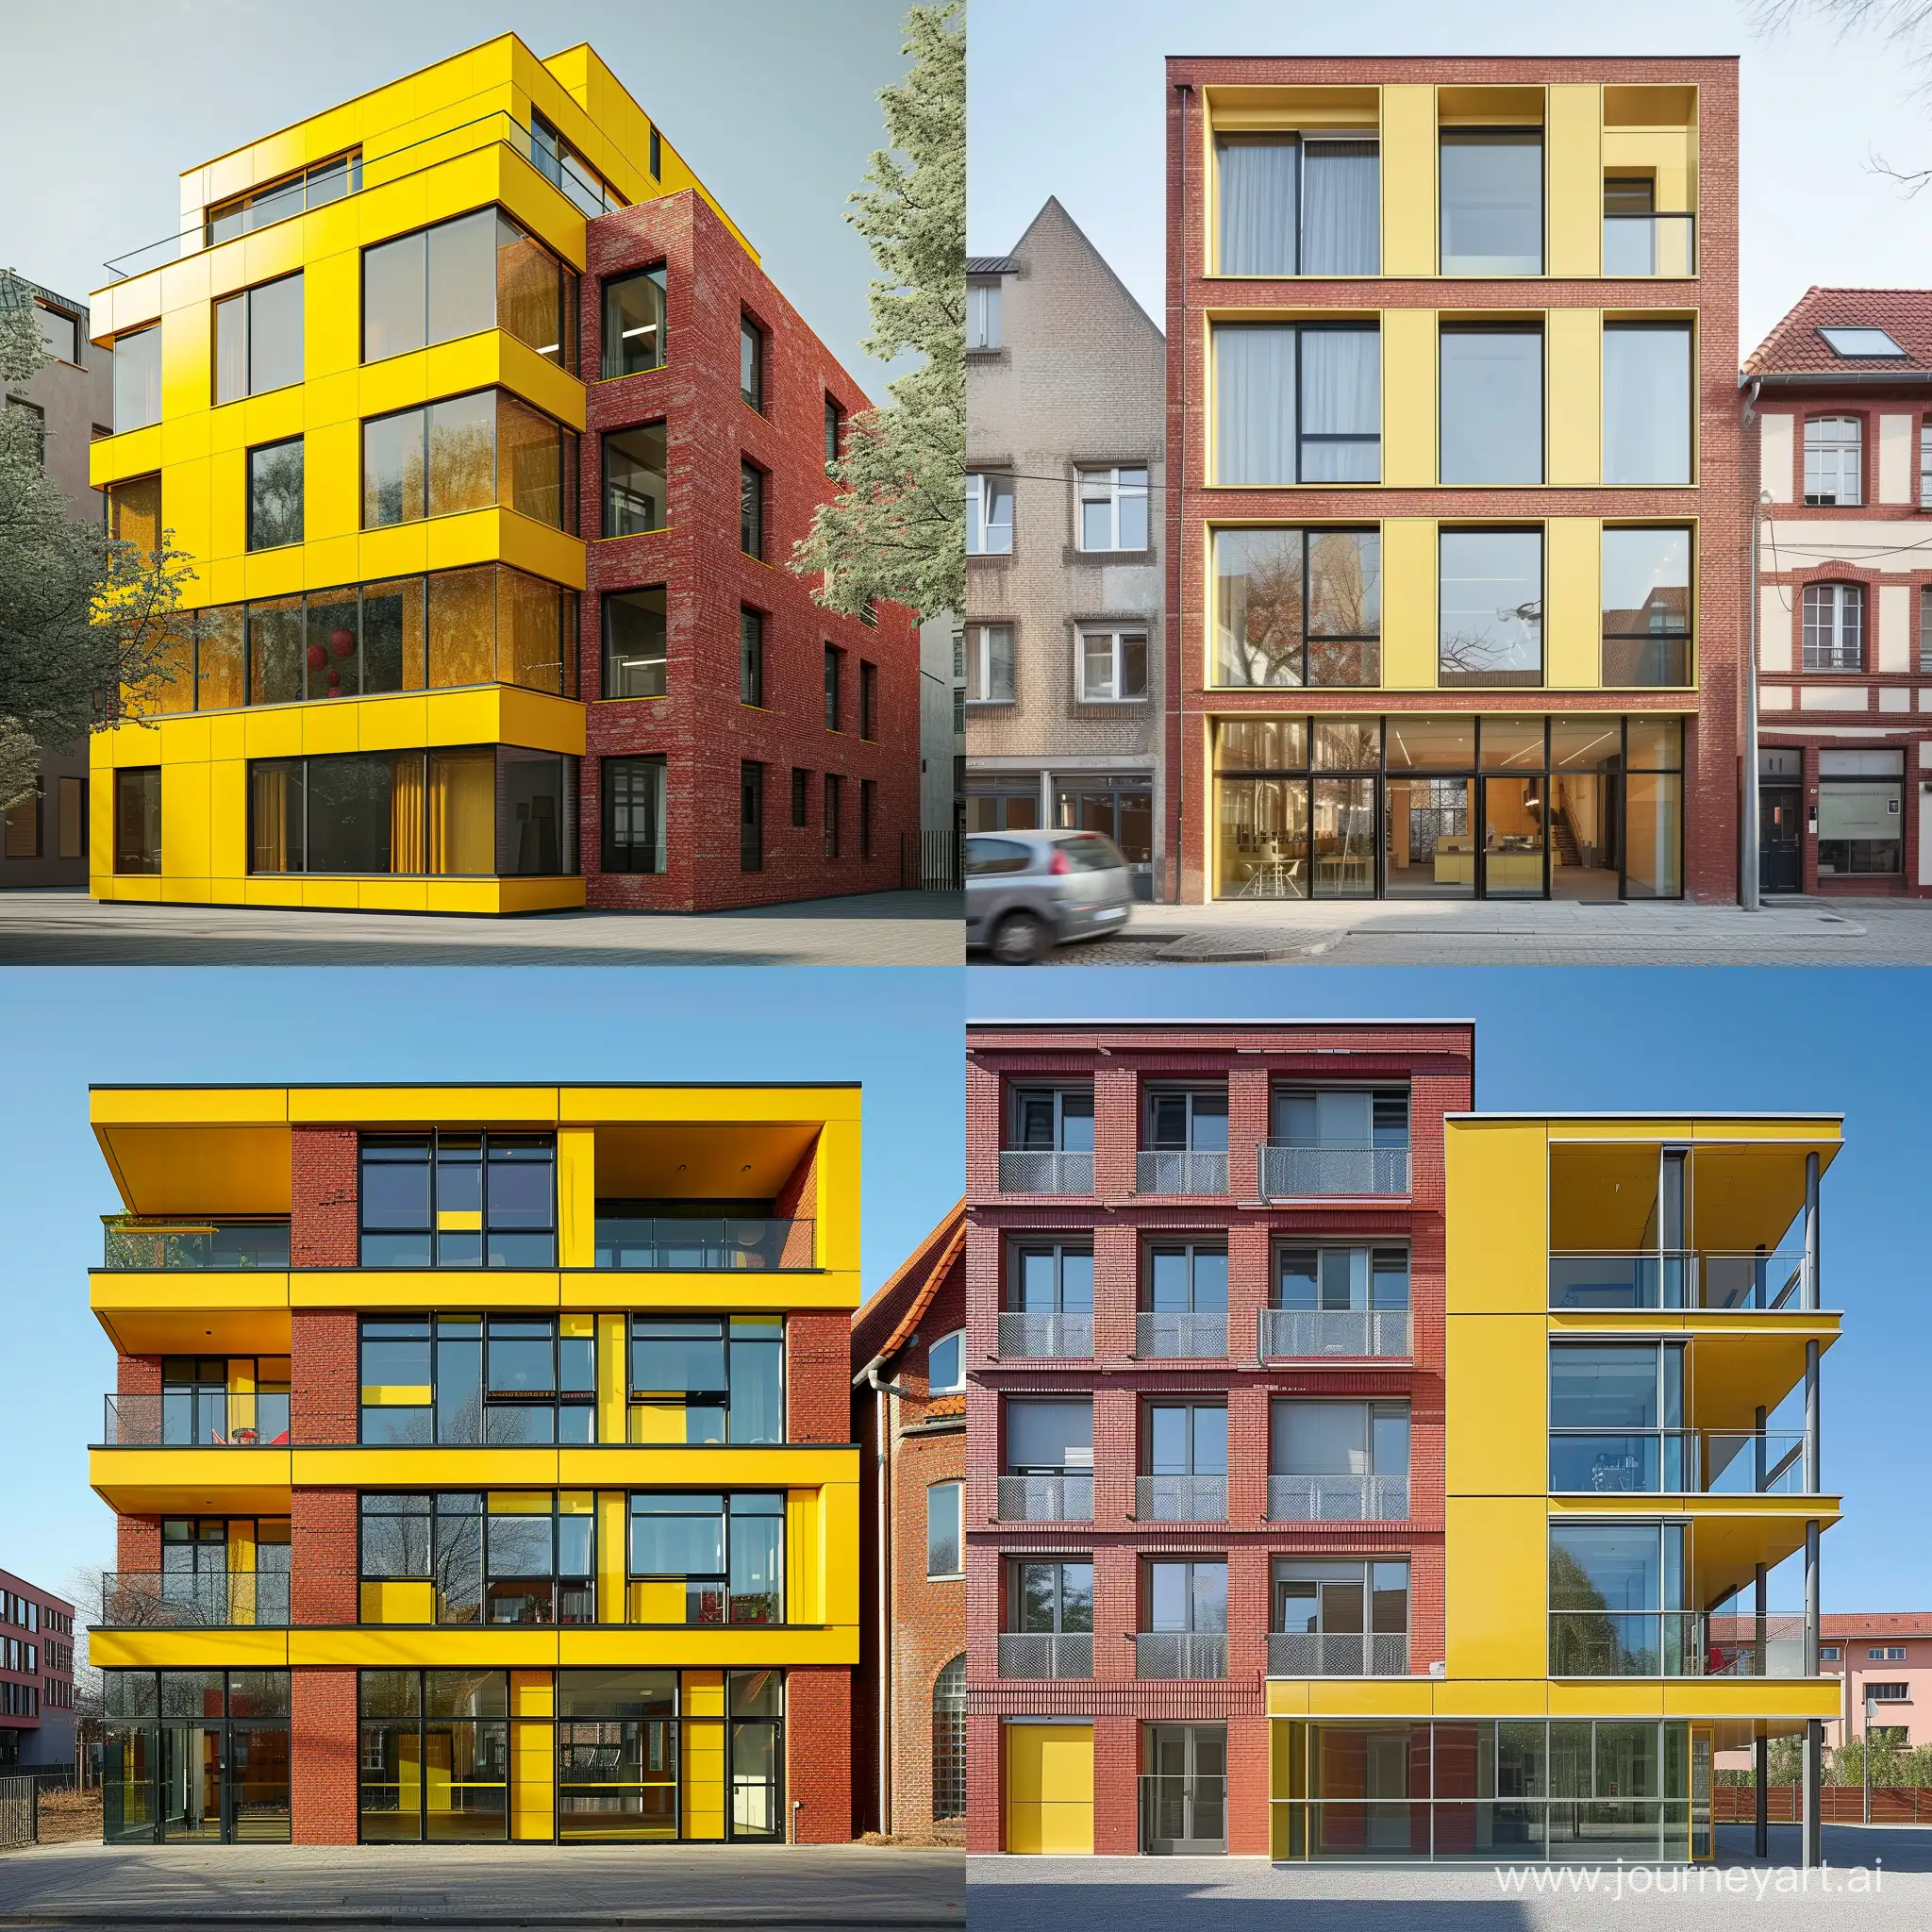 Modern-Yellow-Facade-3Storey-Building-with-Red-Brick-and-Glass-Construction